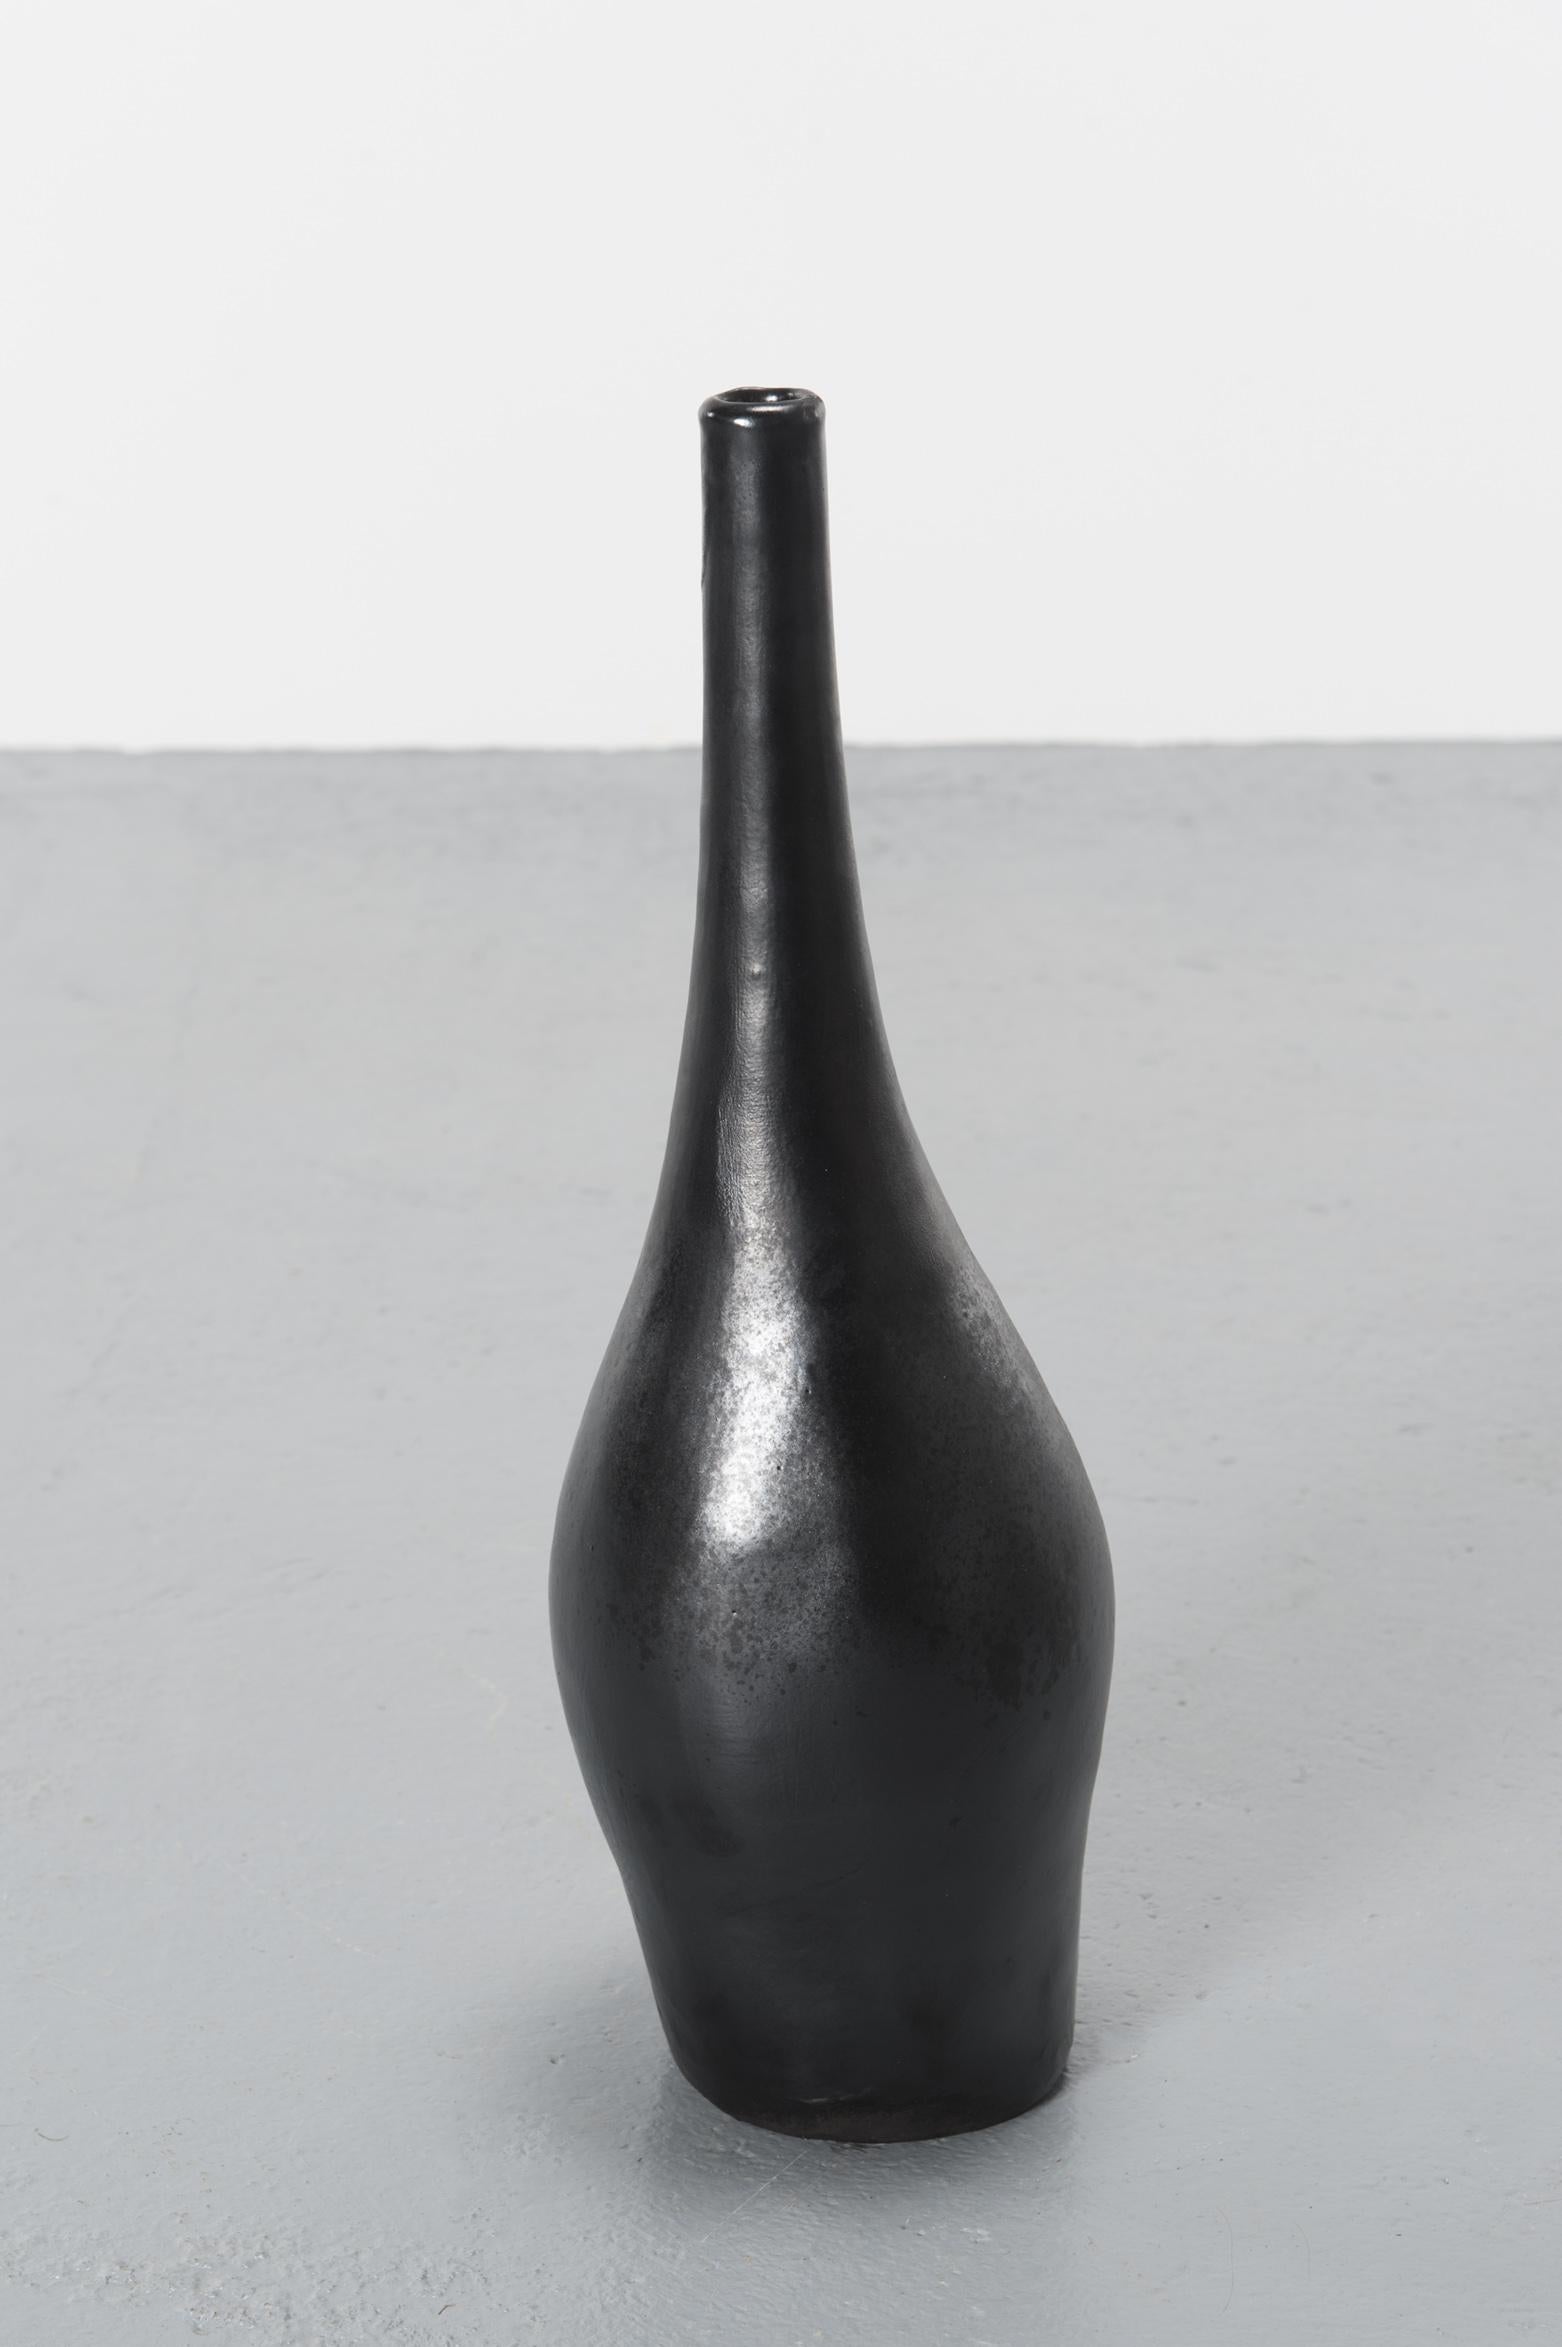 Black French bottle in ceramic by Robert and Jean Cloutier, circa 1960, France

Free form Bottle by Robert and Jean Cloutier in black enameled handmade ceramic. 
Signed 